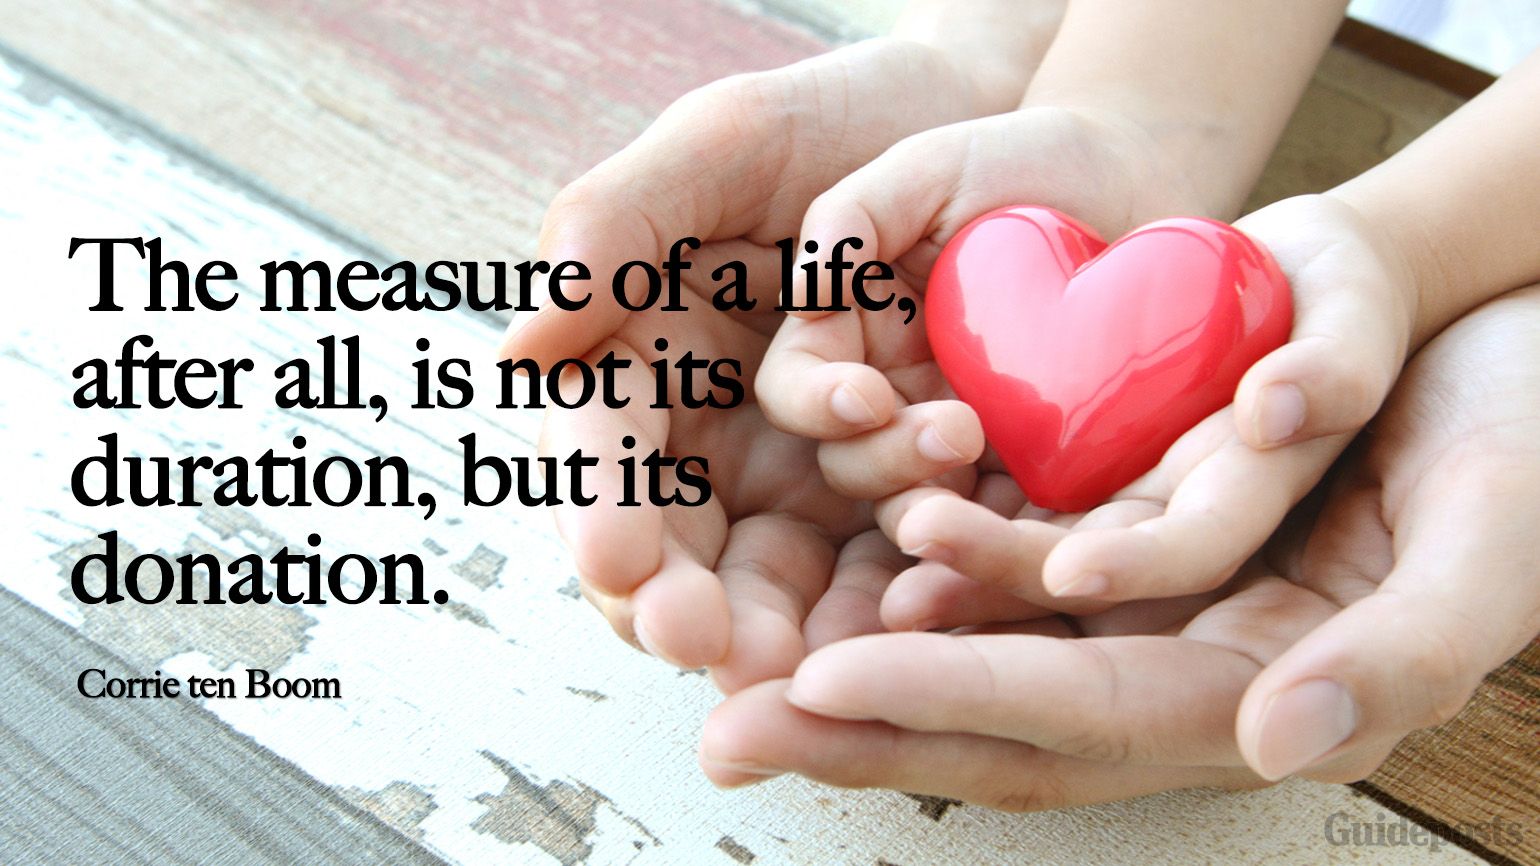 "The measure of a life, after all, is not its duration, but its donation." Inspiring Corrie ten Boom quotes